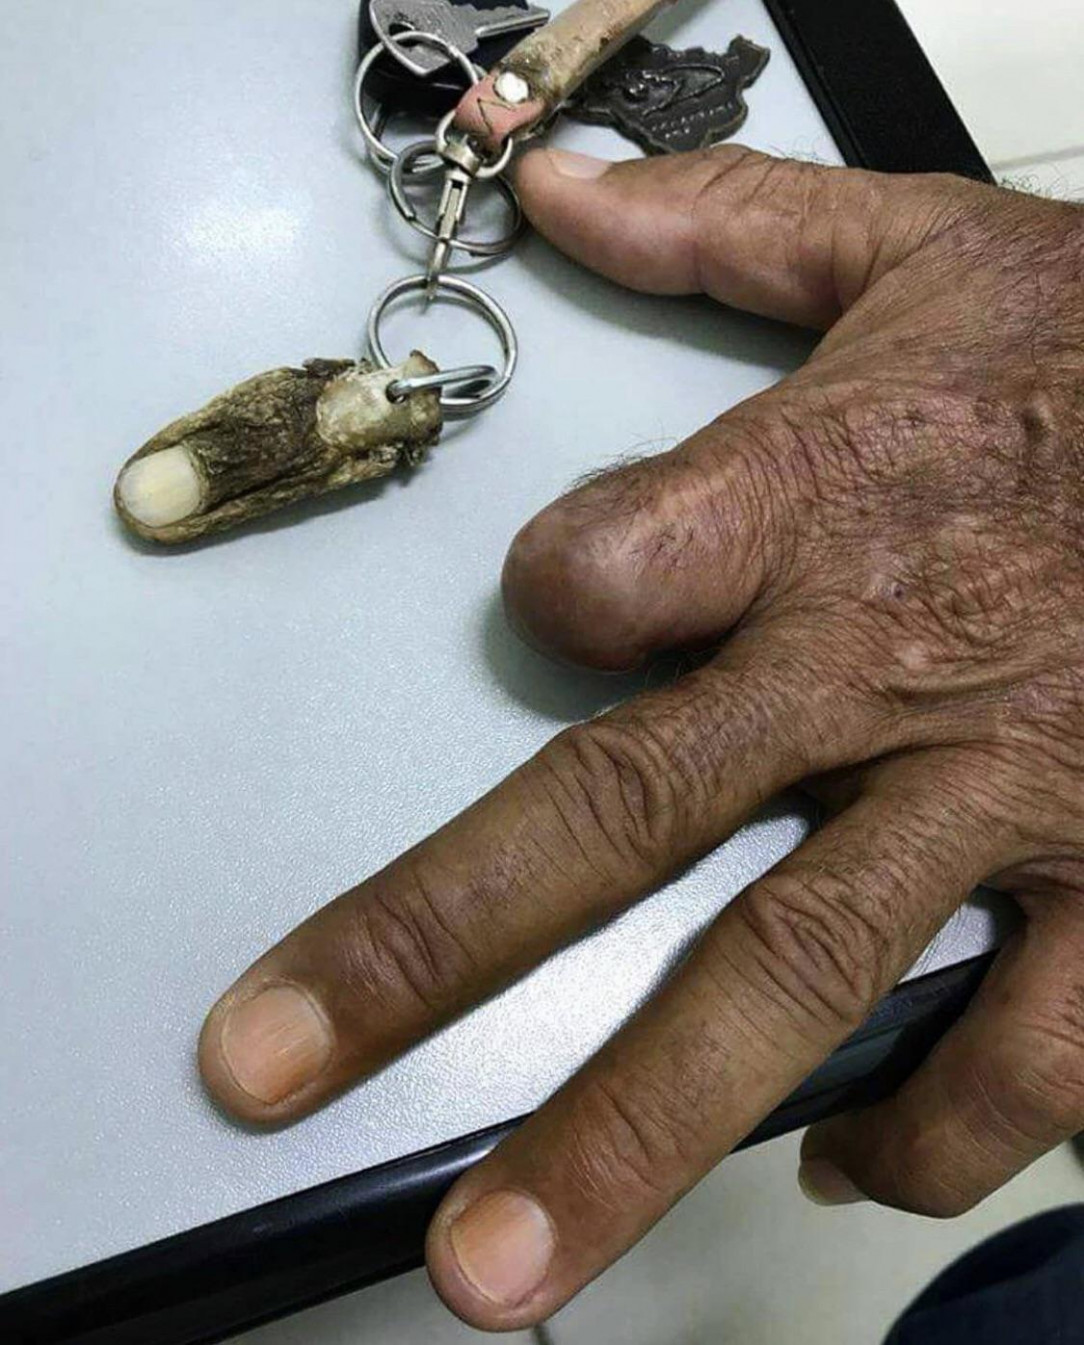 Amputated finger turns into a keychain 😵😱😳